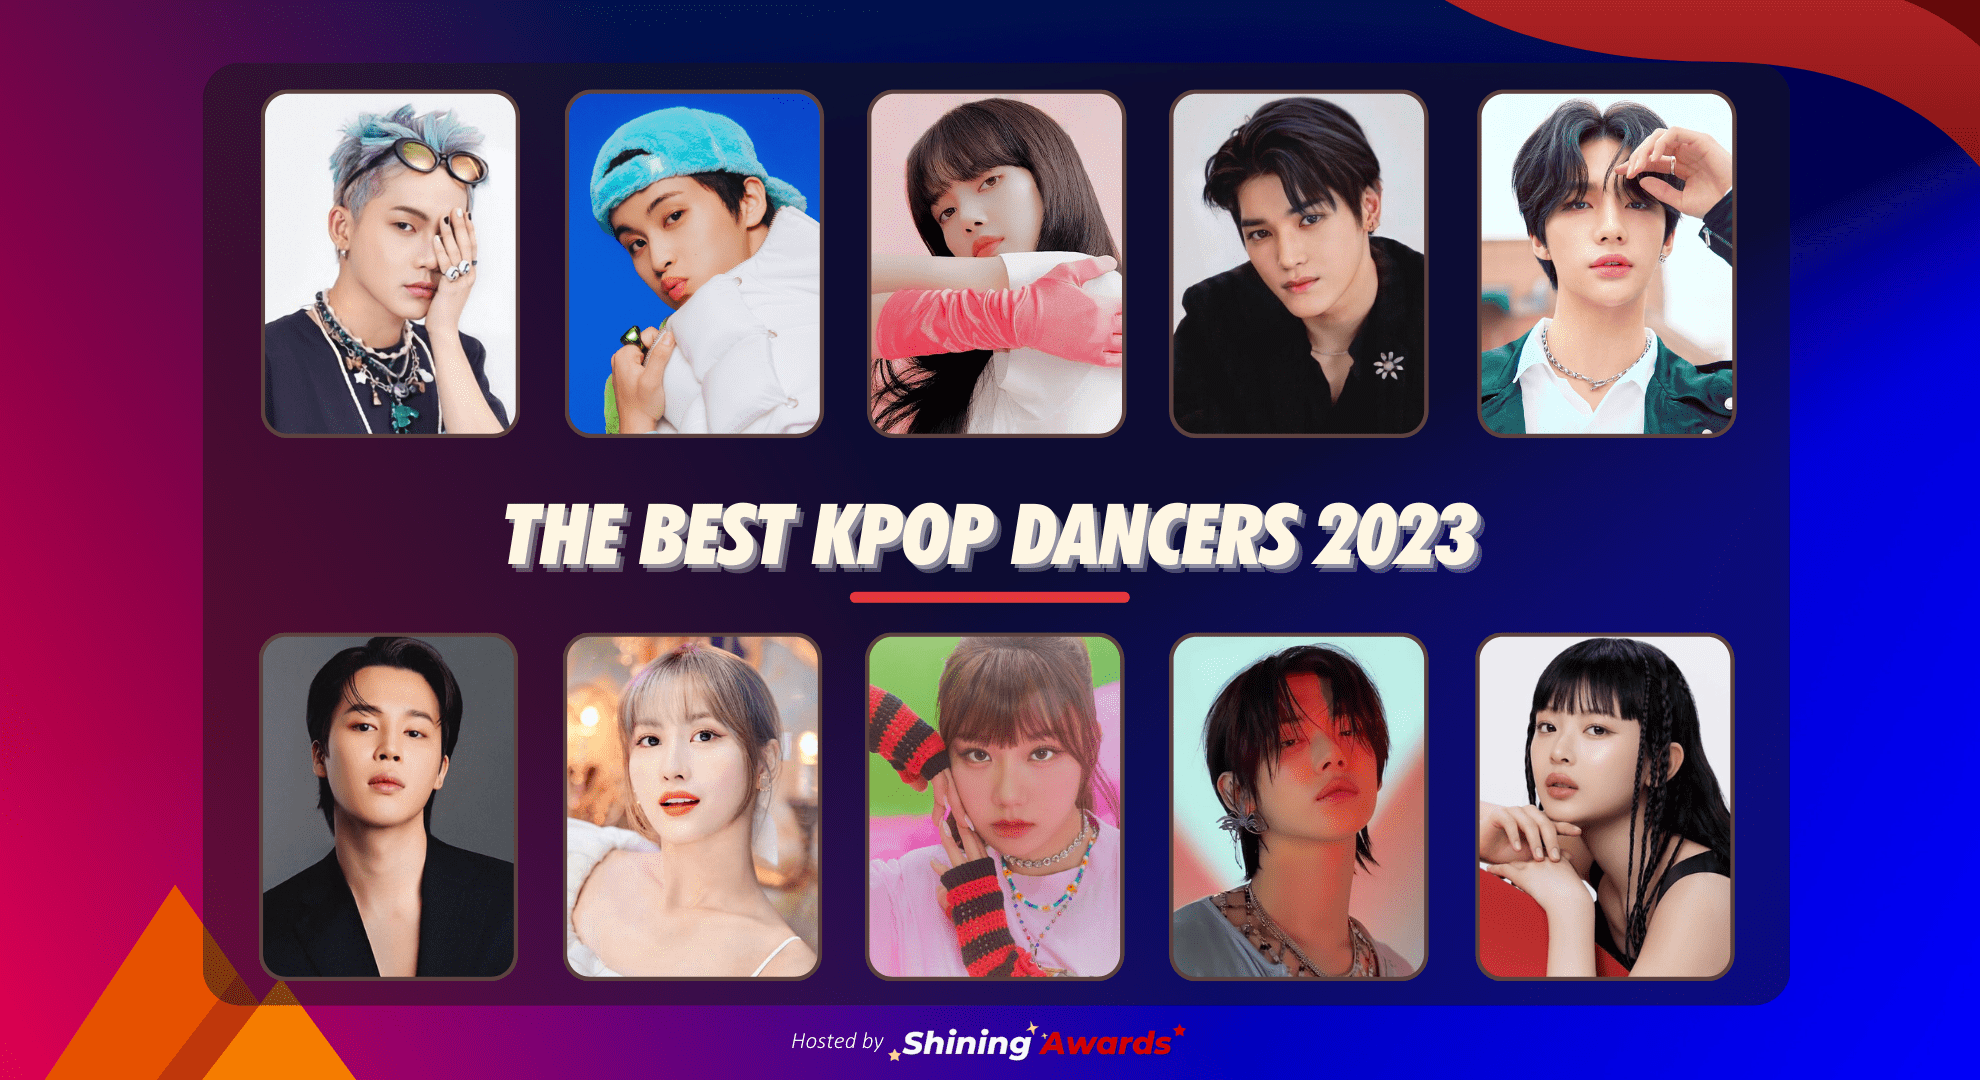 The Best Kpop Dancers 2023 (Close May 31) Shining Awards